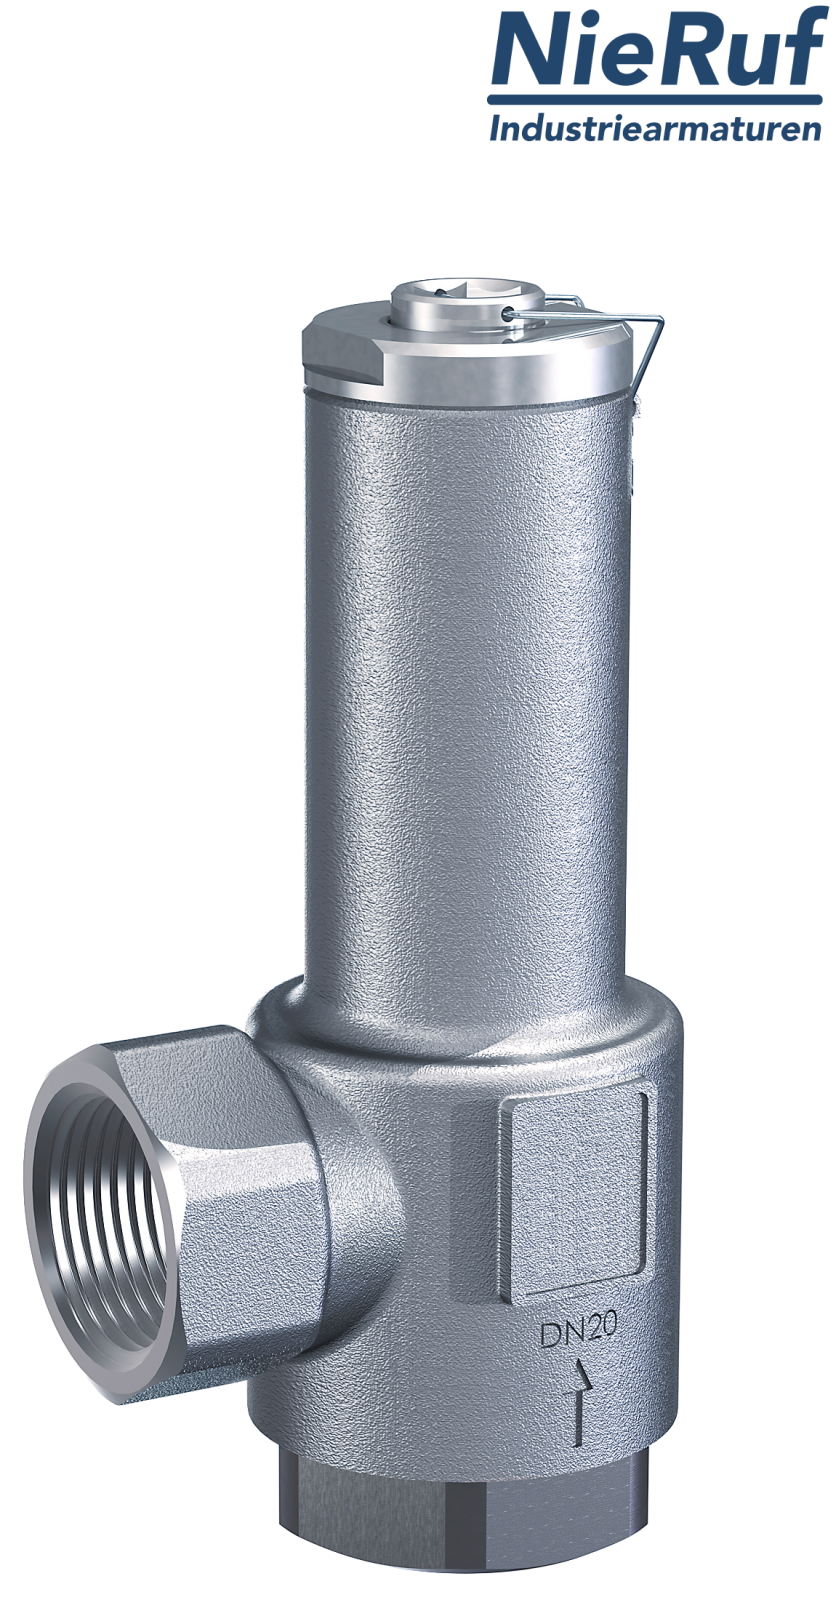 angle-type overflow valve 1" inch fm UV04 stainless steel AISI 316L 12 - 20 bar